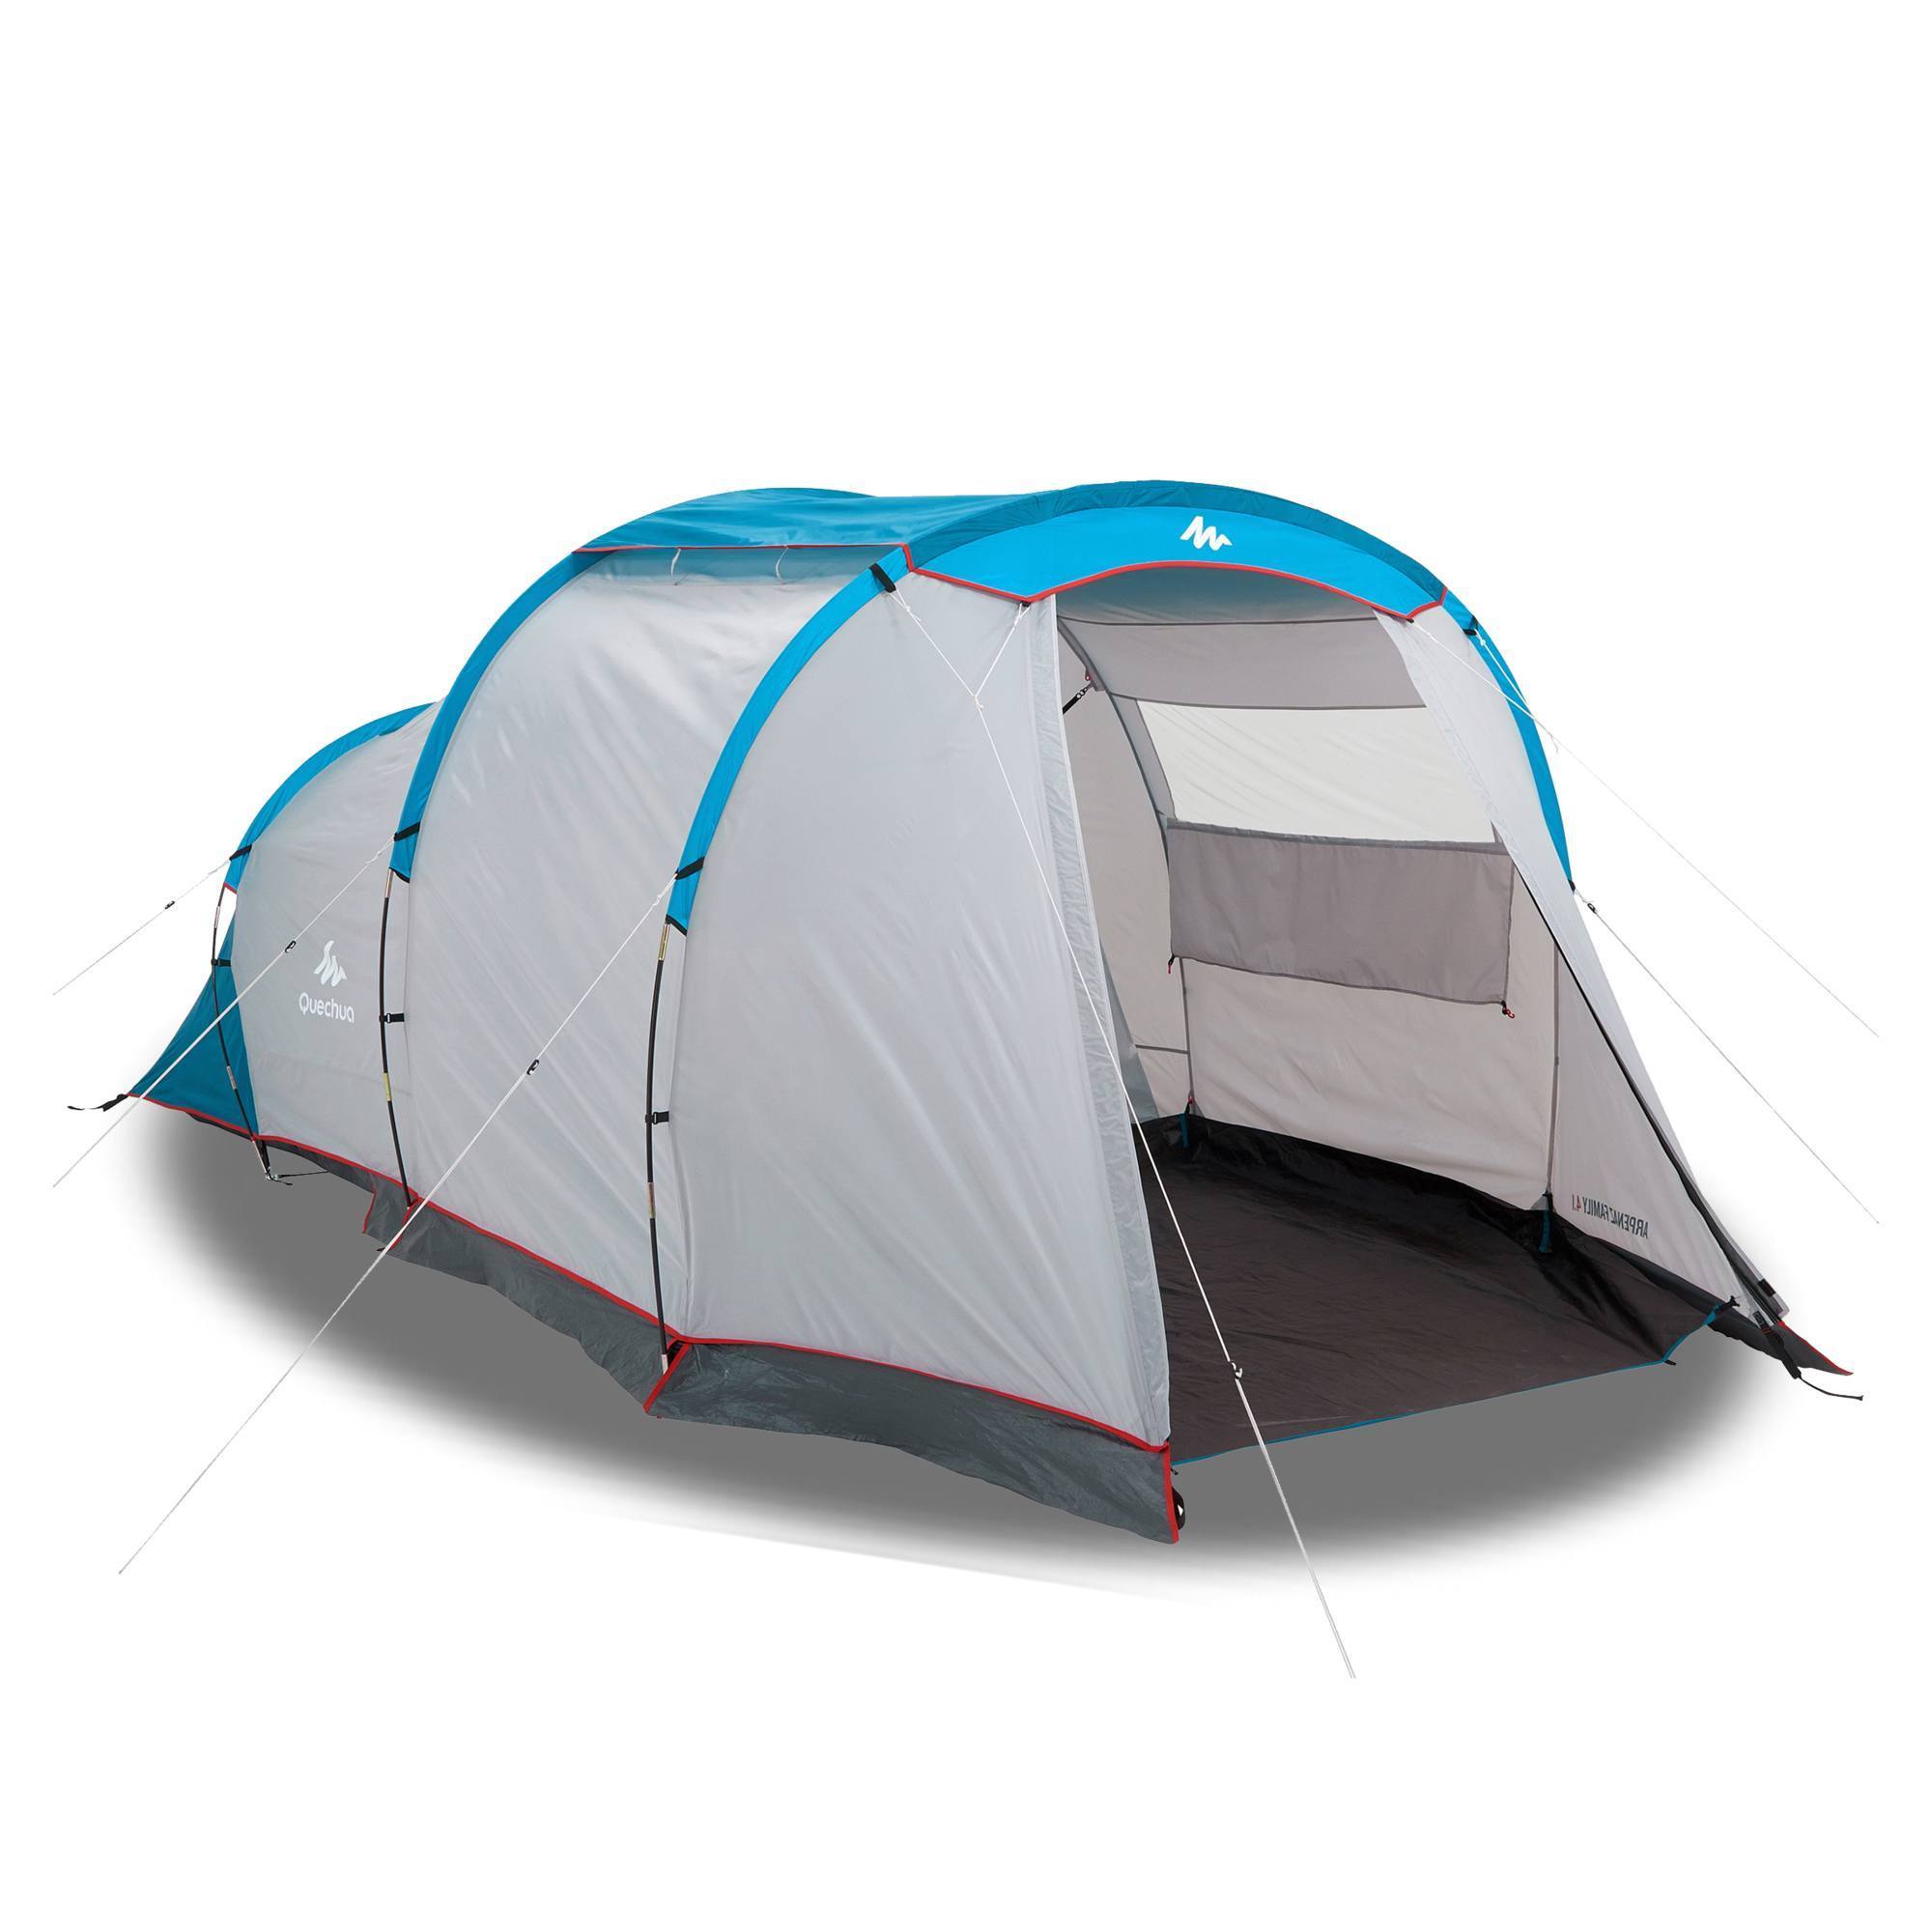 Quechua, Waterproof, Family Camping Tent, 4 Person, 1 Bedroom - image 3 of 16